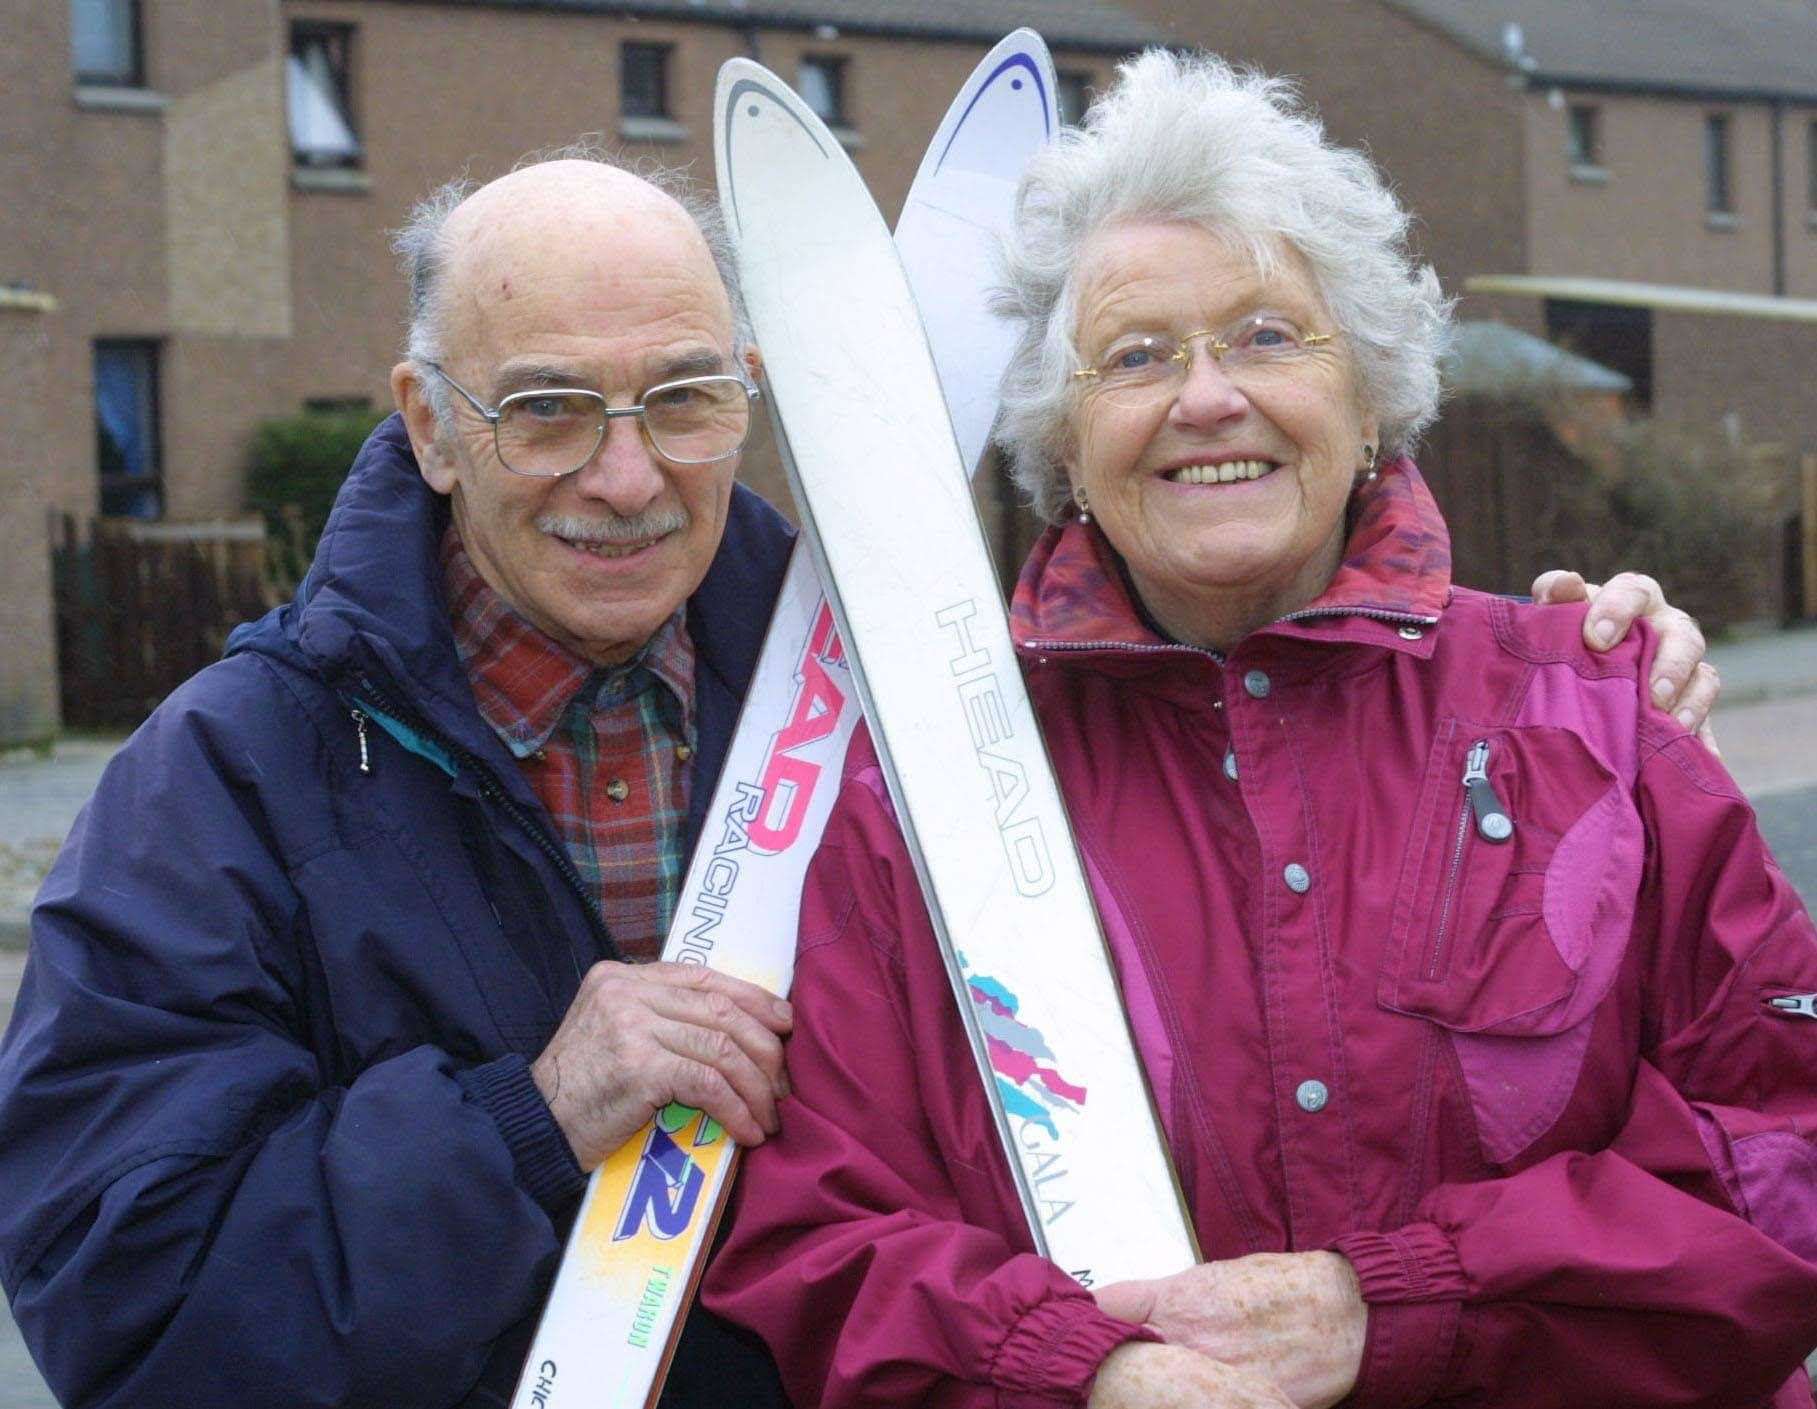 Chic and May Baxter, who passed away in 2011, used to hike up to the high tops of the Cairngorms so that they could ski before uplift was installed.